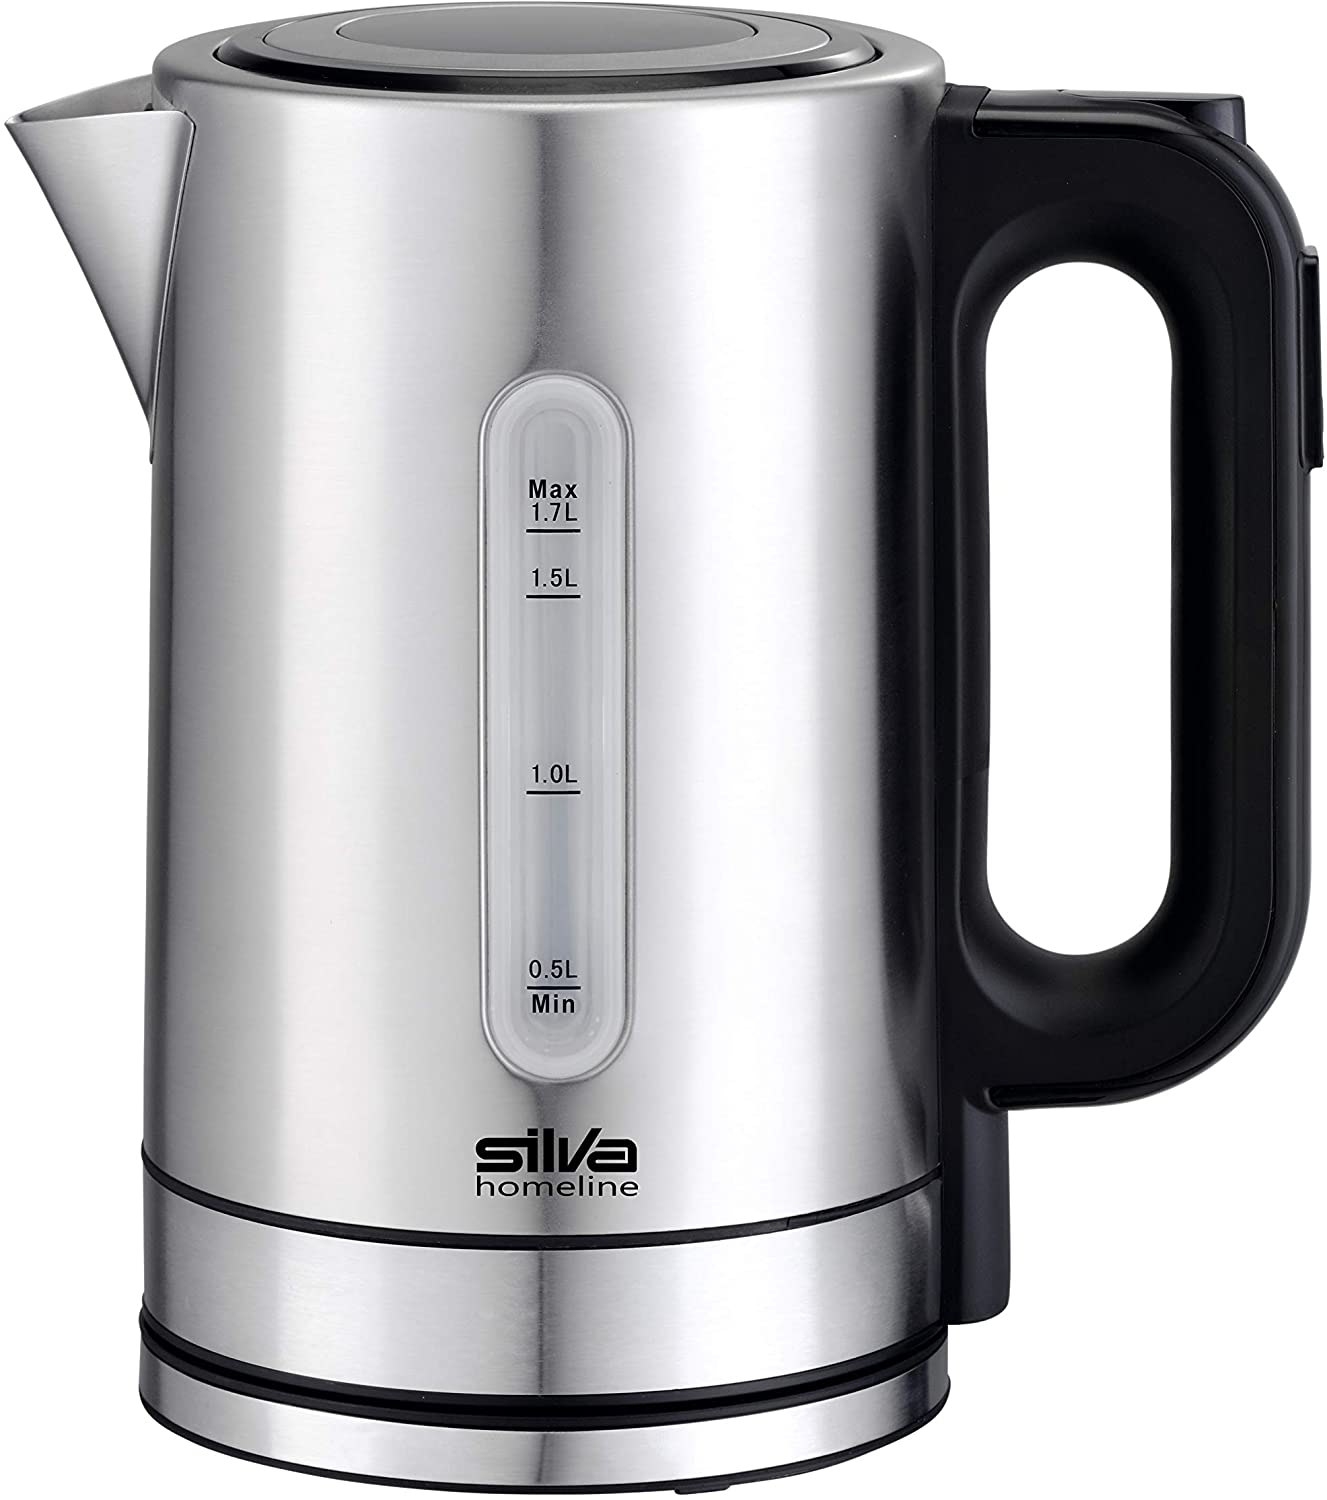 Silva-Homeline KL-T 2200 stainless steel kettle control and illuminated level indicator, 5 selectable temperatures, stainless steel, 1.7 litres, 1